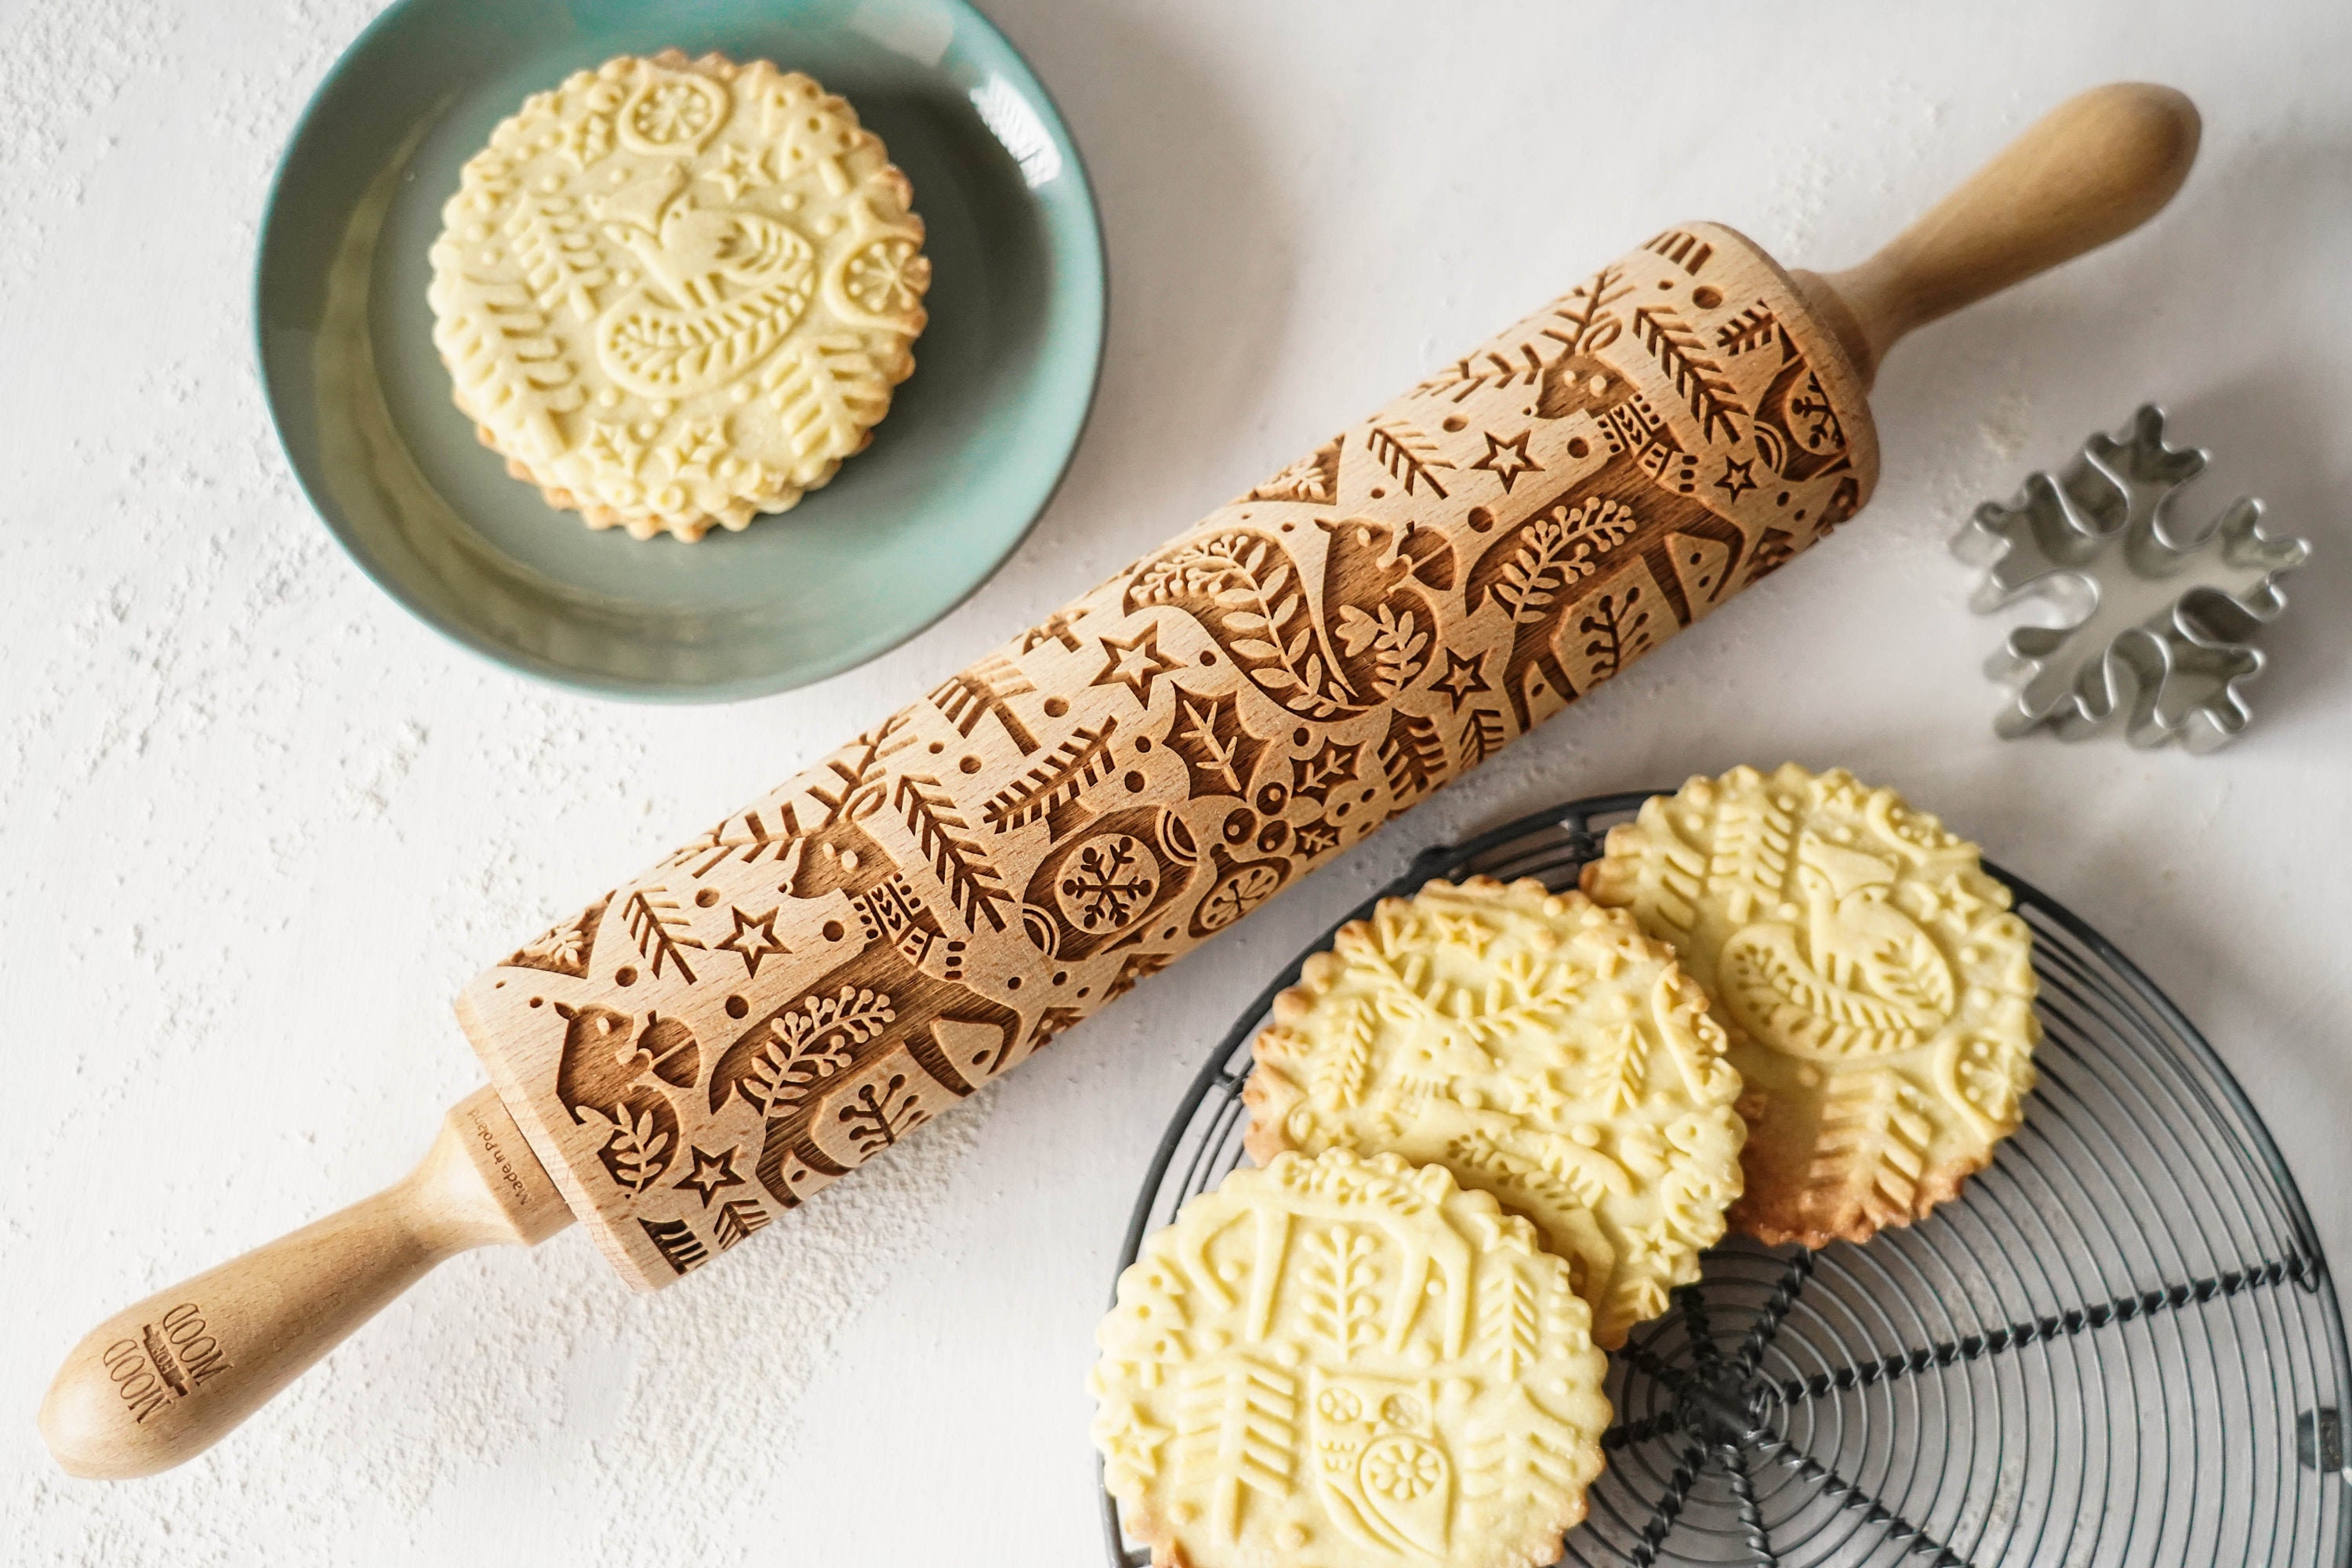 NIPPON Set of 5 Rolling Pins for Cookies Perfect Gift Idea, Floral,  Organic, Natural, Christmas Gift Idea, Mother's Day Japanese Design -   Canada